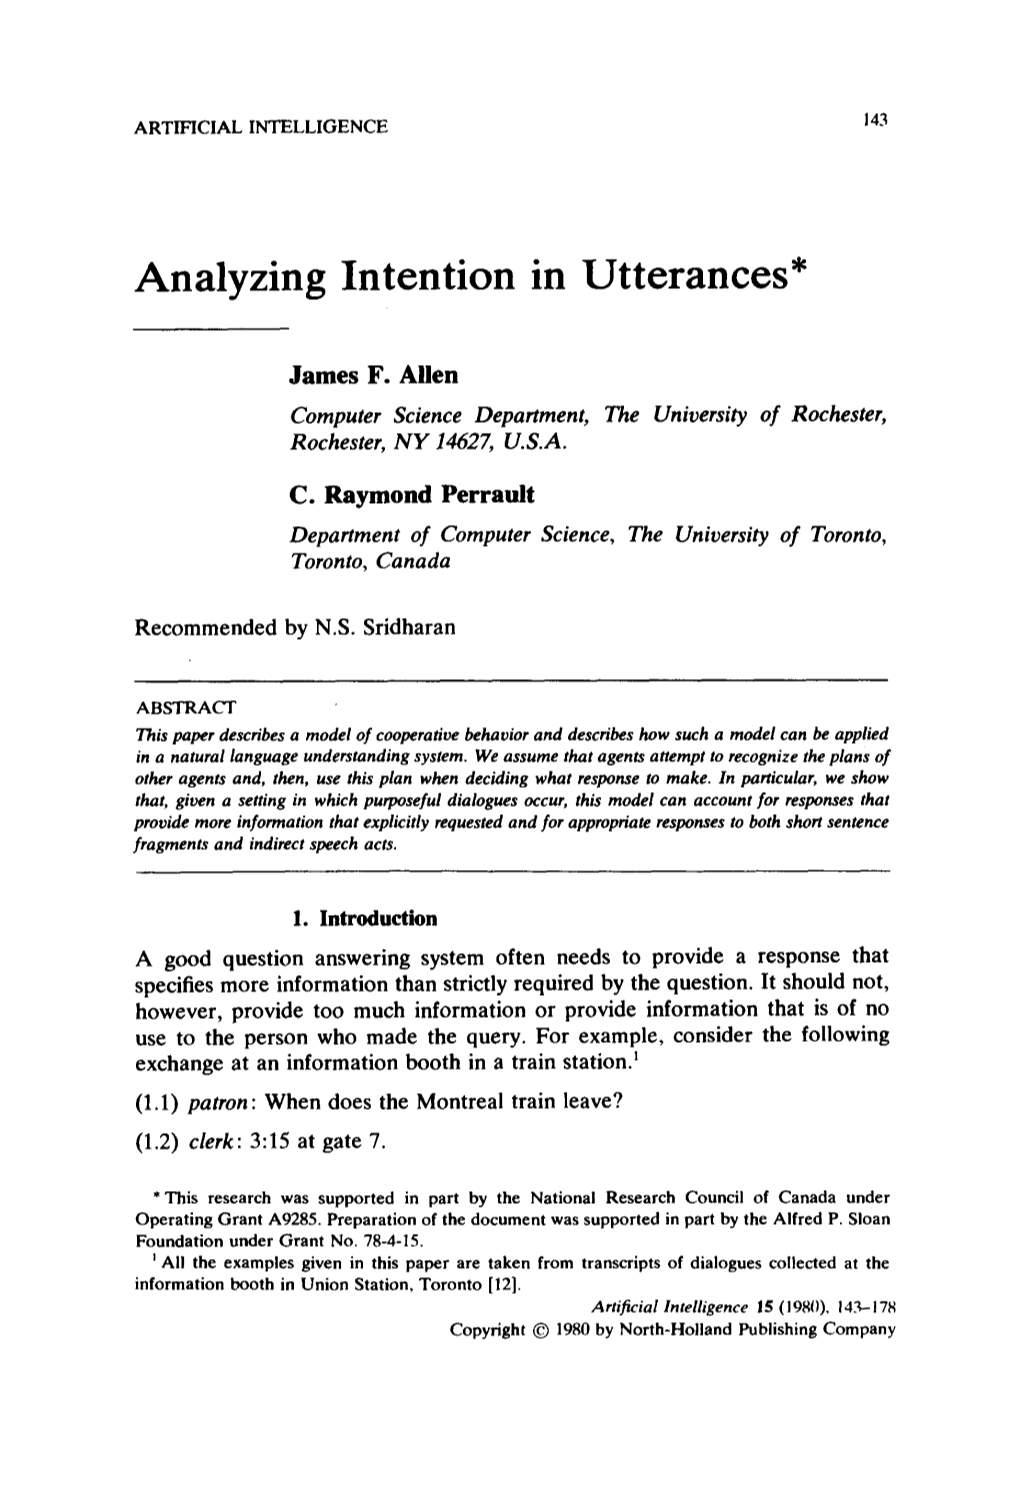 Analyzing Intention in Utterances*